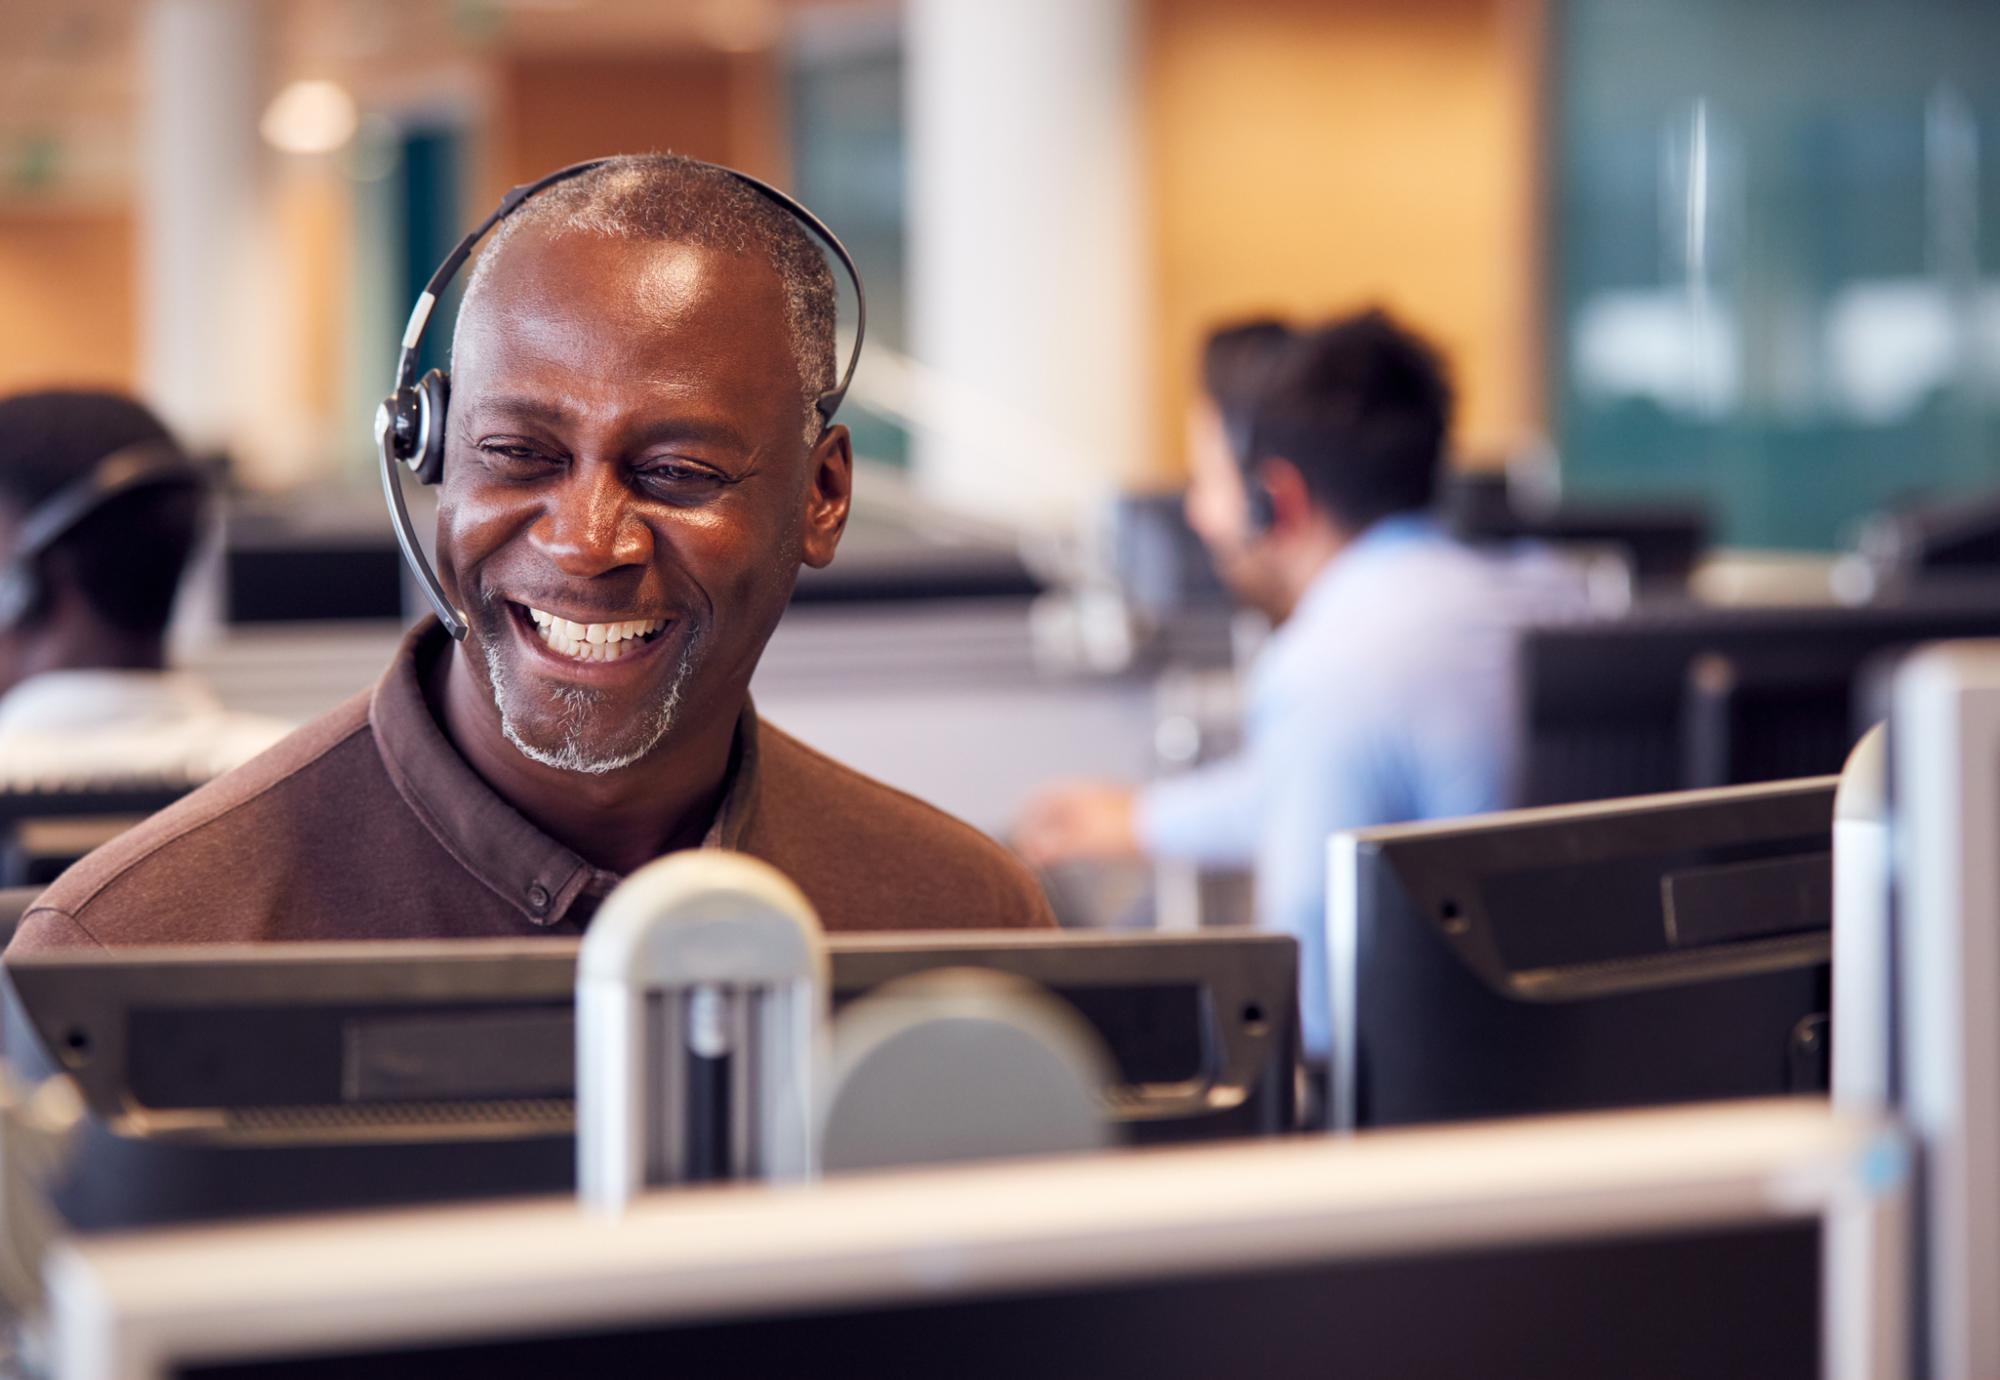 Smiling man operating a headset in a call centre environment